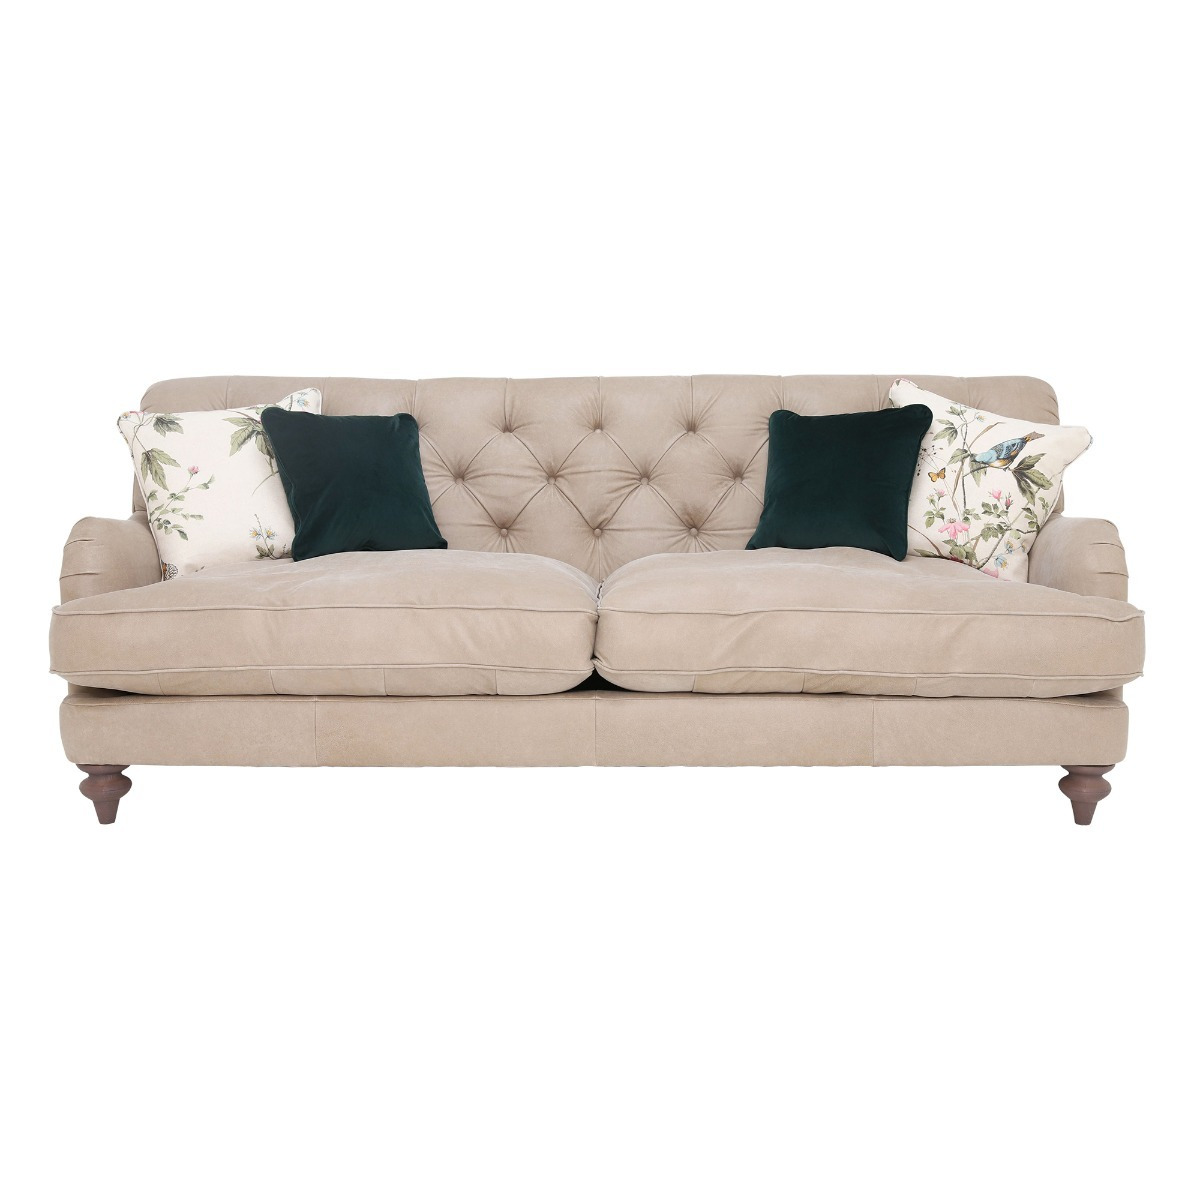 Windermere Large Sofa, Brown Leather - Barker & Stonehouse - image 1